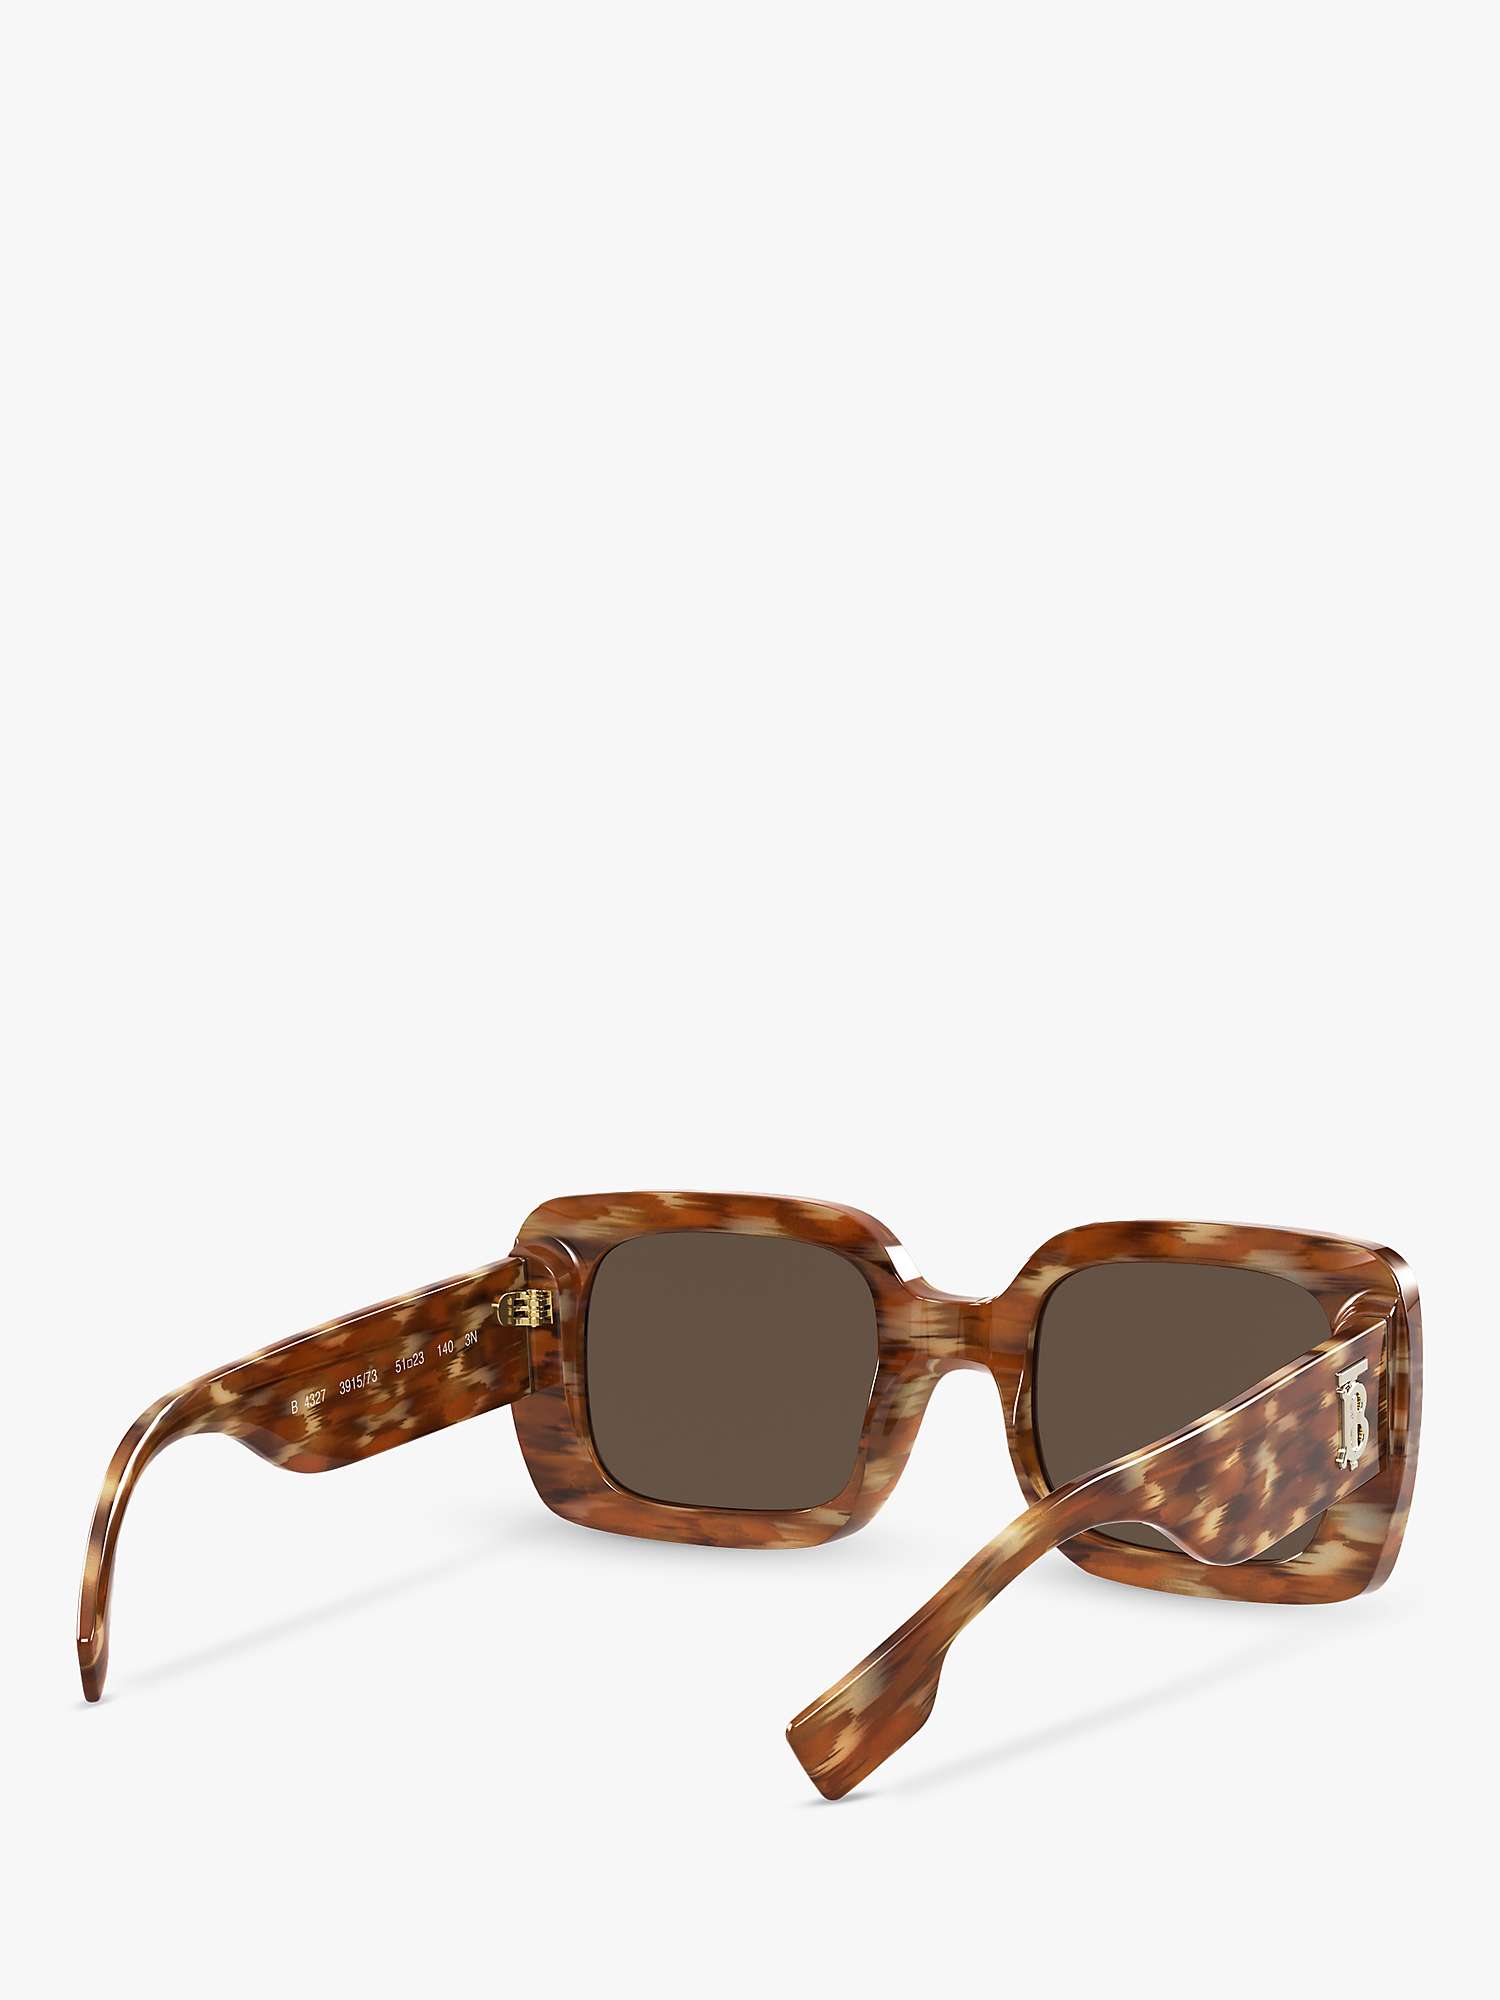 Buy Burberry BE4327 Women's Square Sunglasses, Brown Online at johnlewis.com